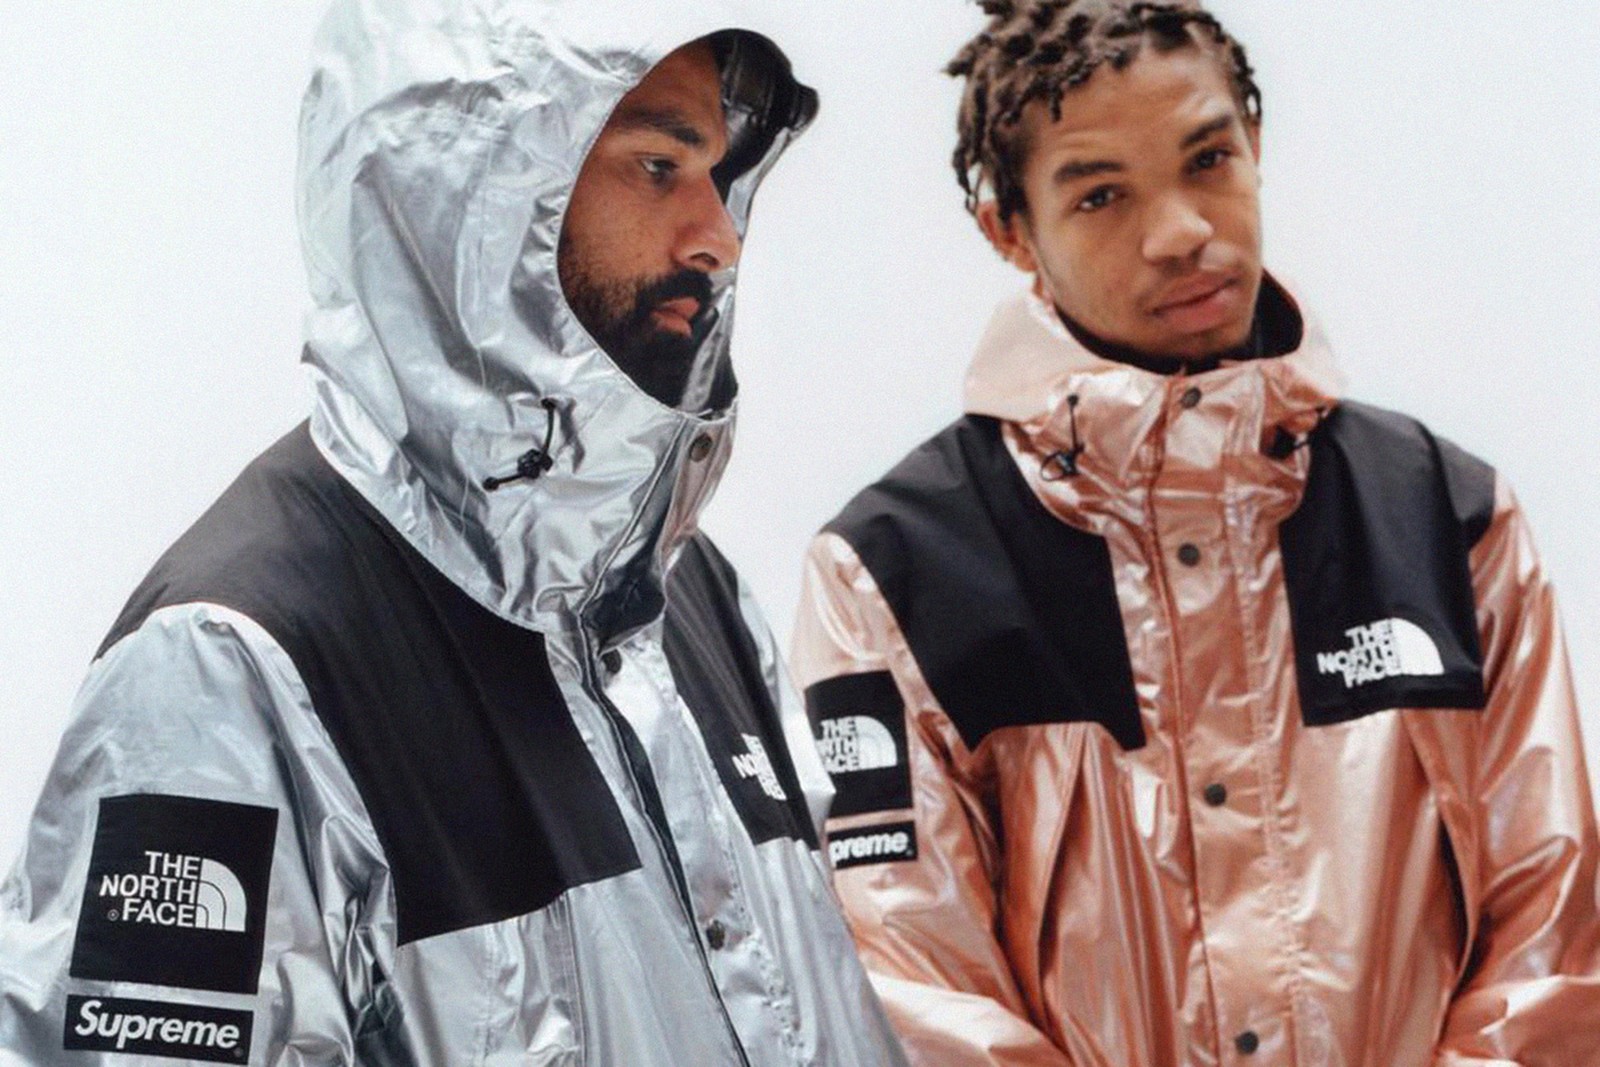 The Supreme x The North Face Collab Just Revealed Their New Drop 